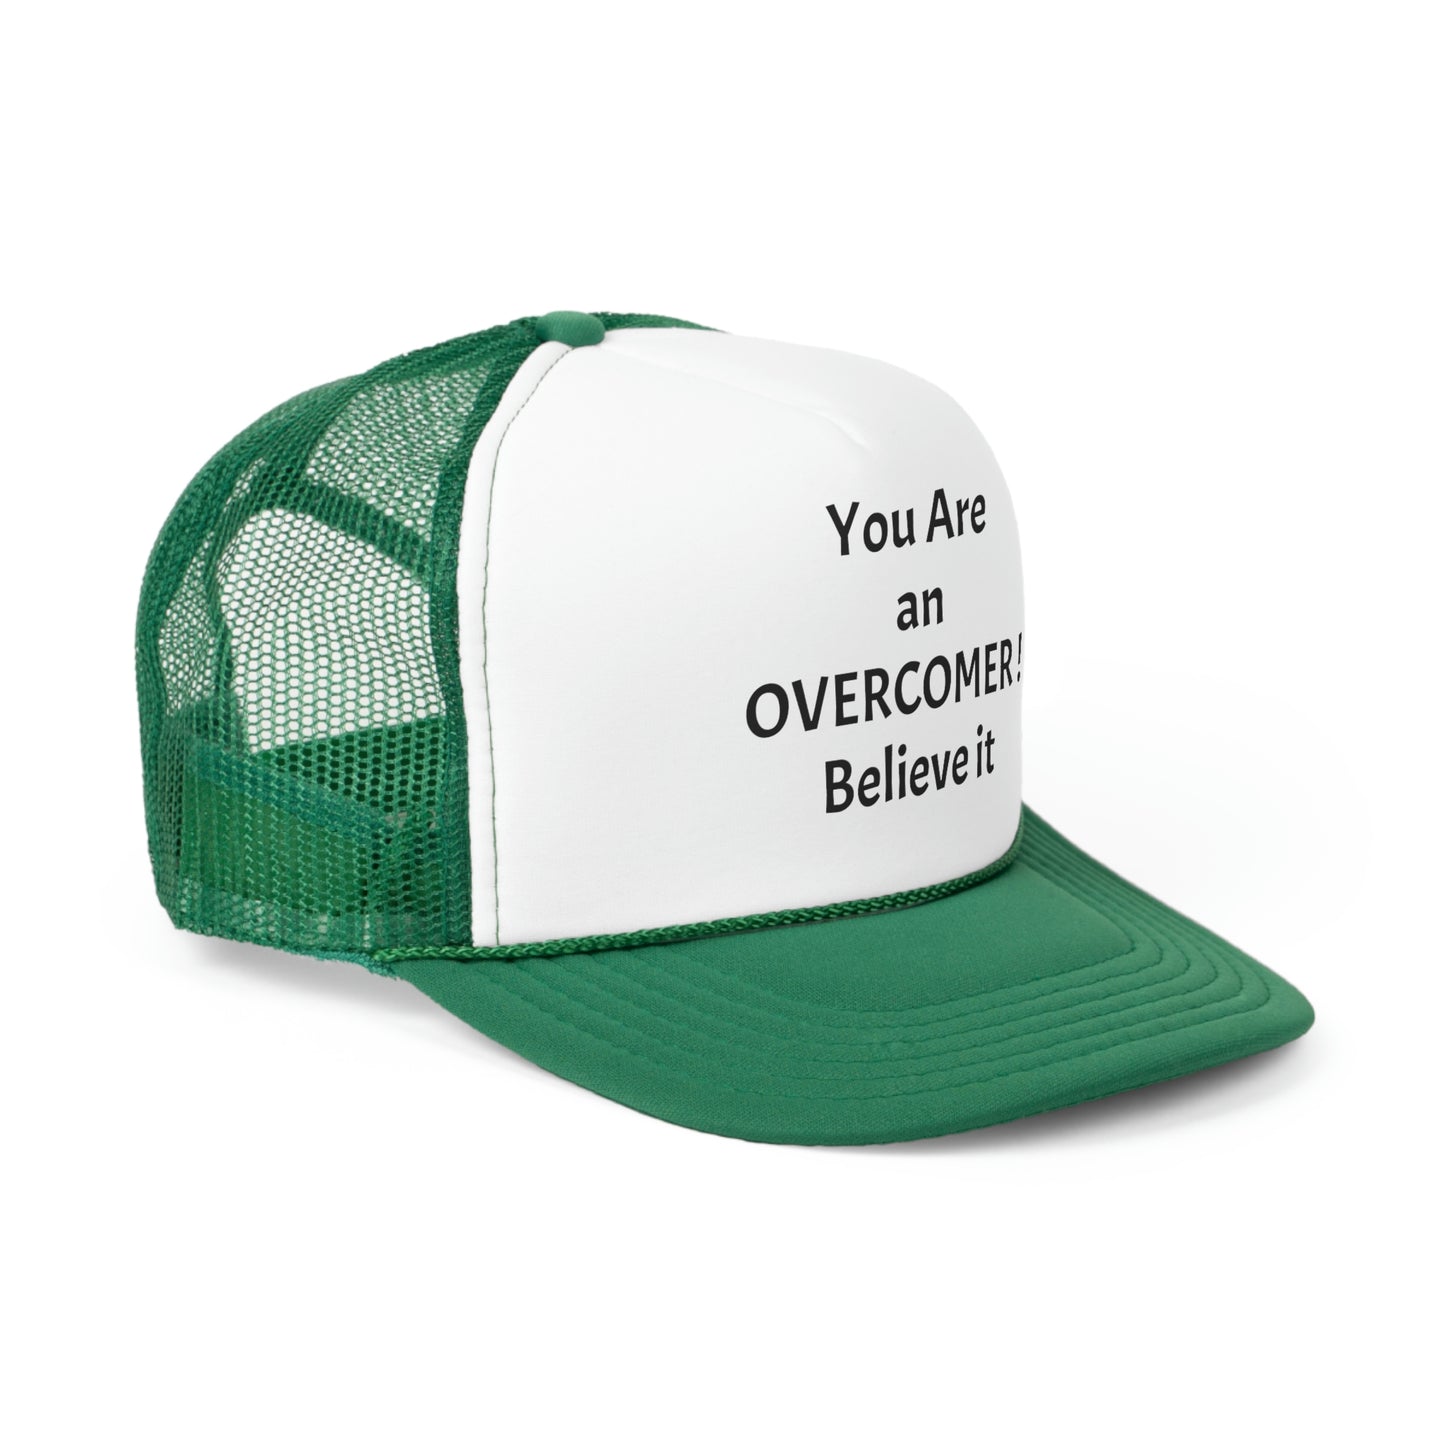 You Are an Overcomer! Trucker Caps